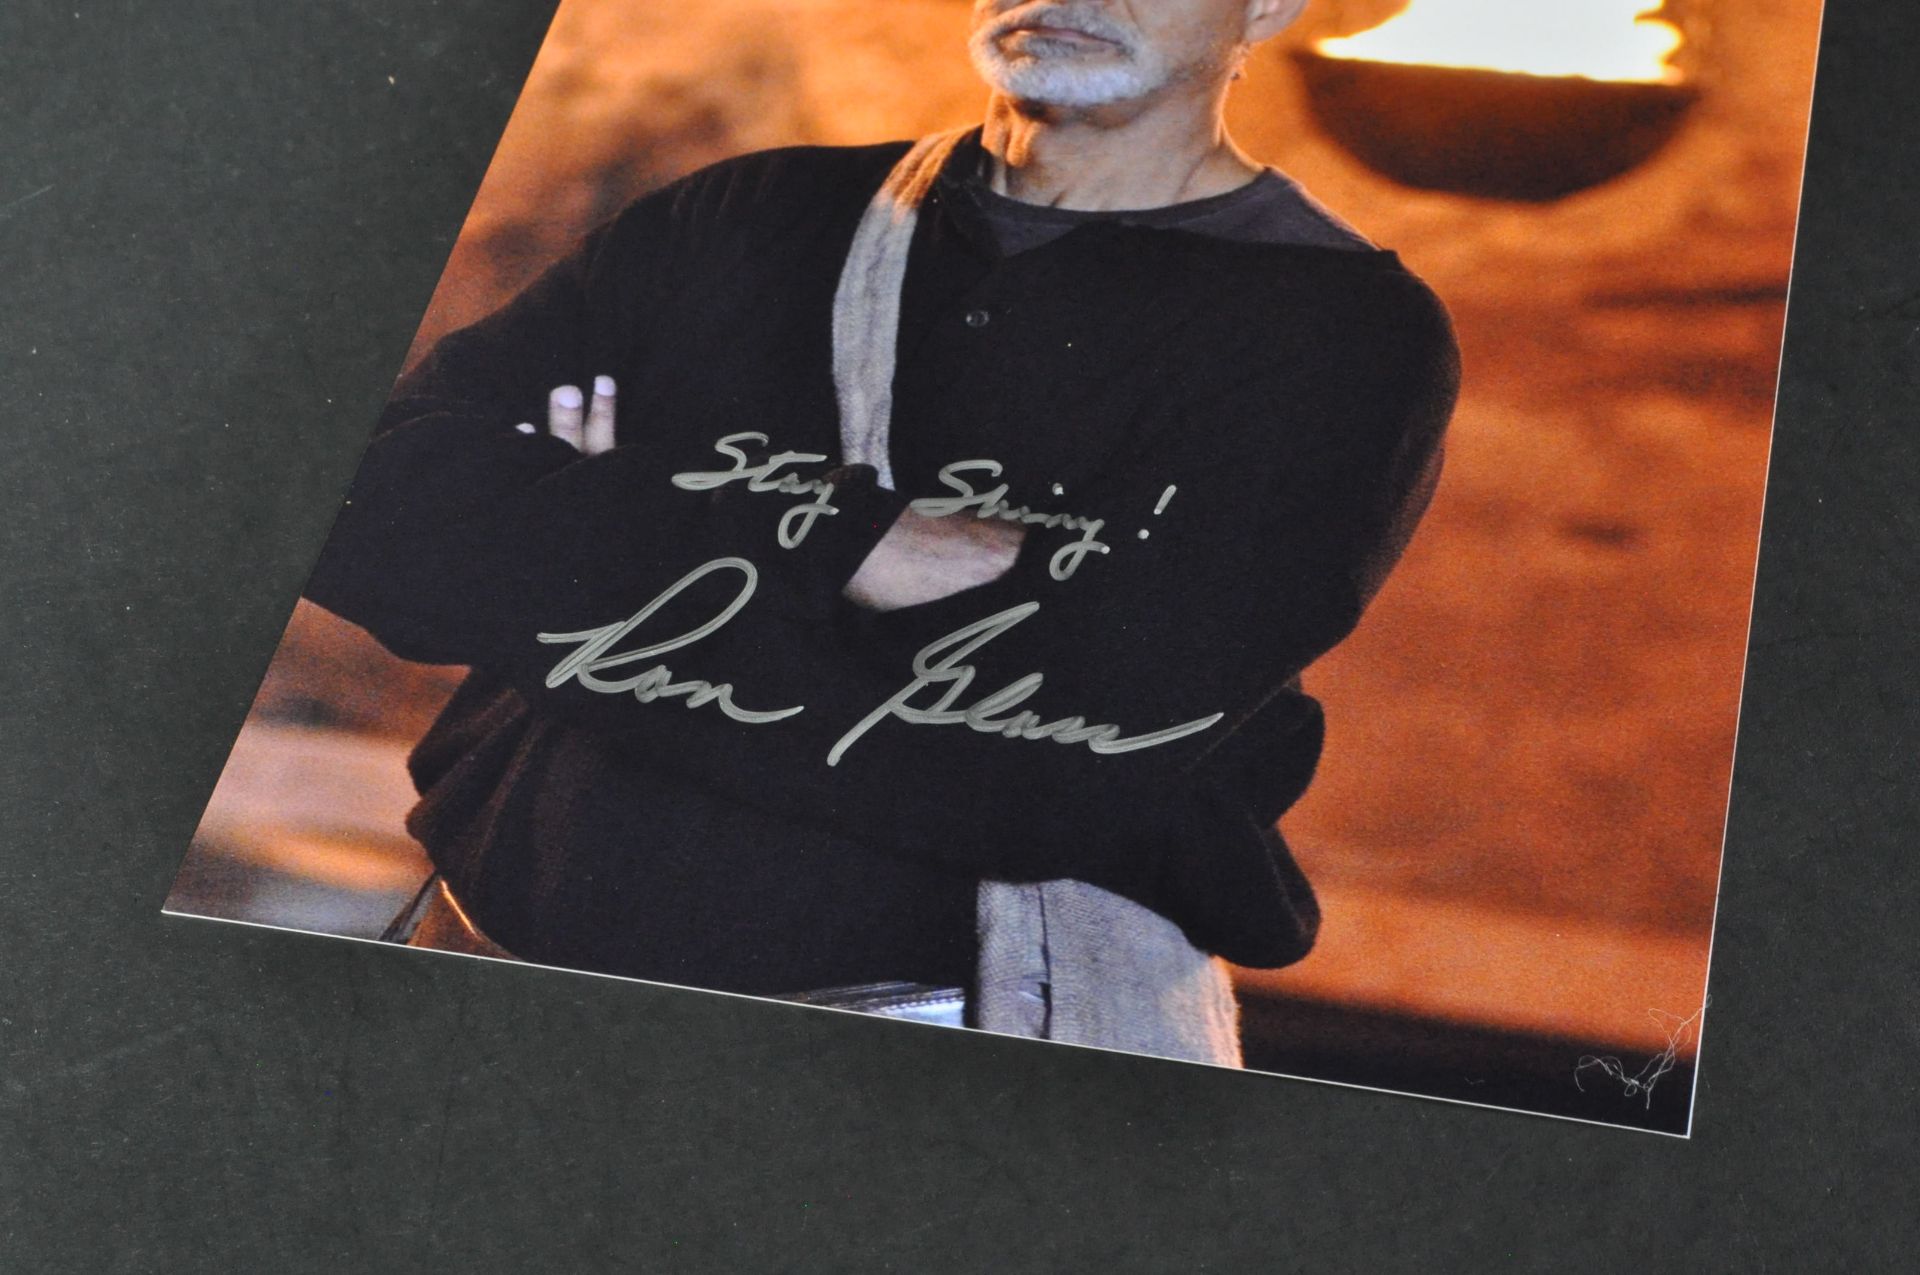 FIREFLY - RON GLASS (1945-2016) - SIGNED 8X10" PHOTOGRAPH - Image 2 of 2